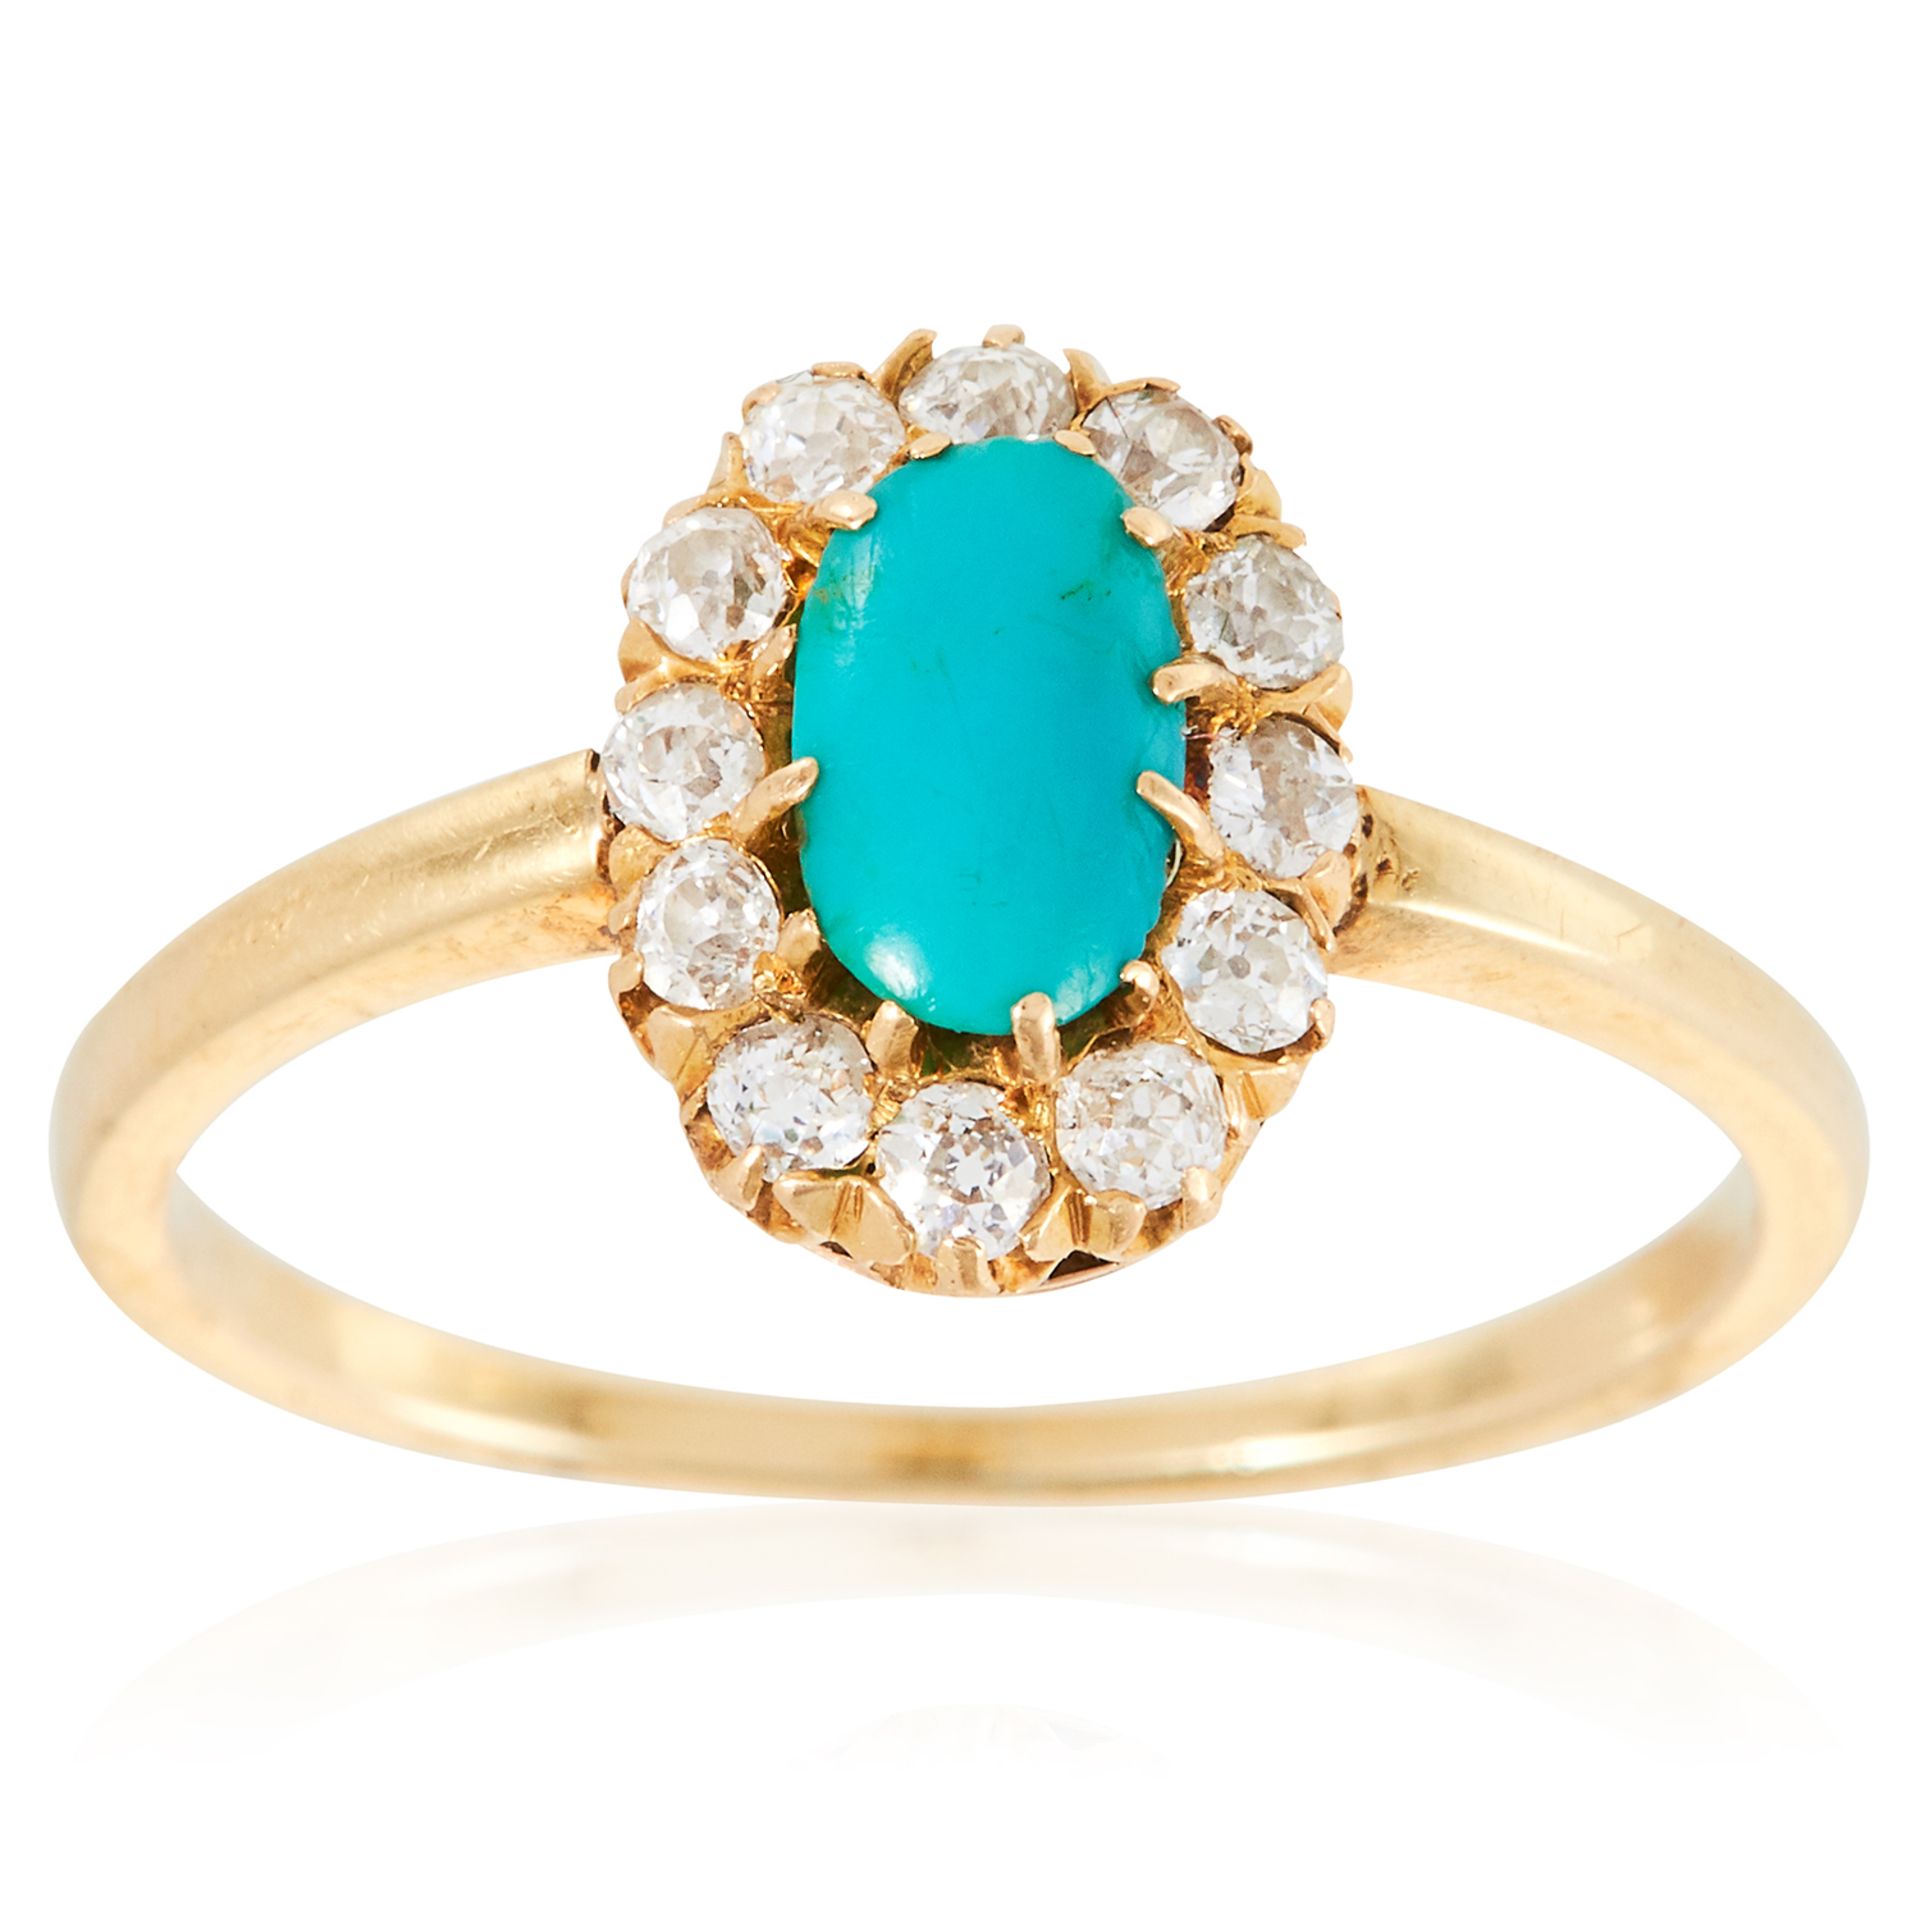 A TURQUOISE AND DIAMOND CLUSTER RING in high carat yellow gold, set with a cabochon turquoise in a